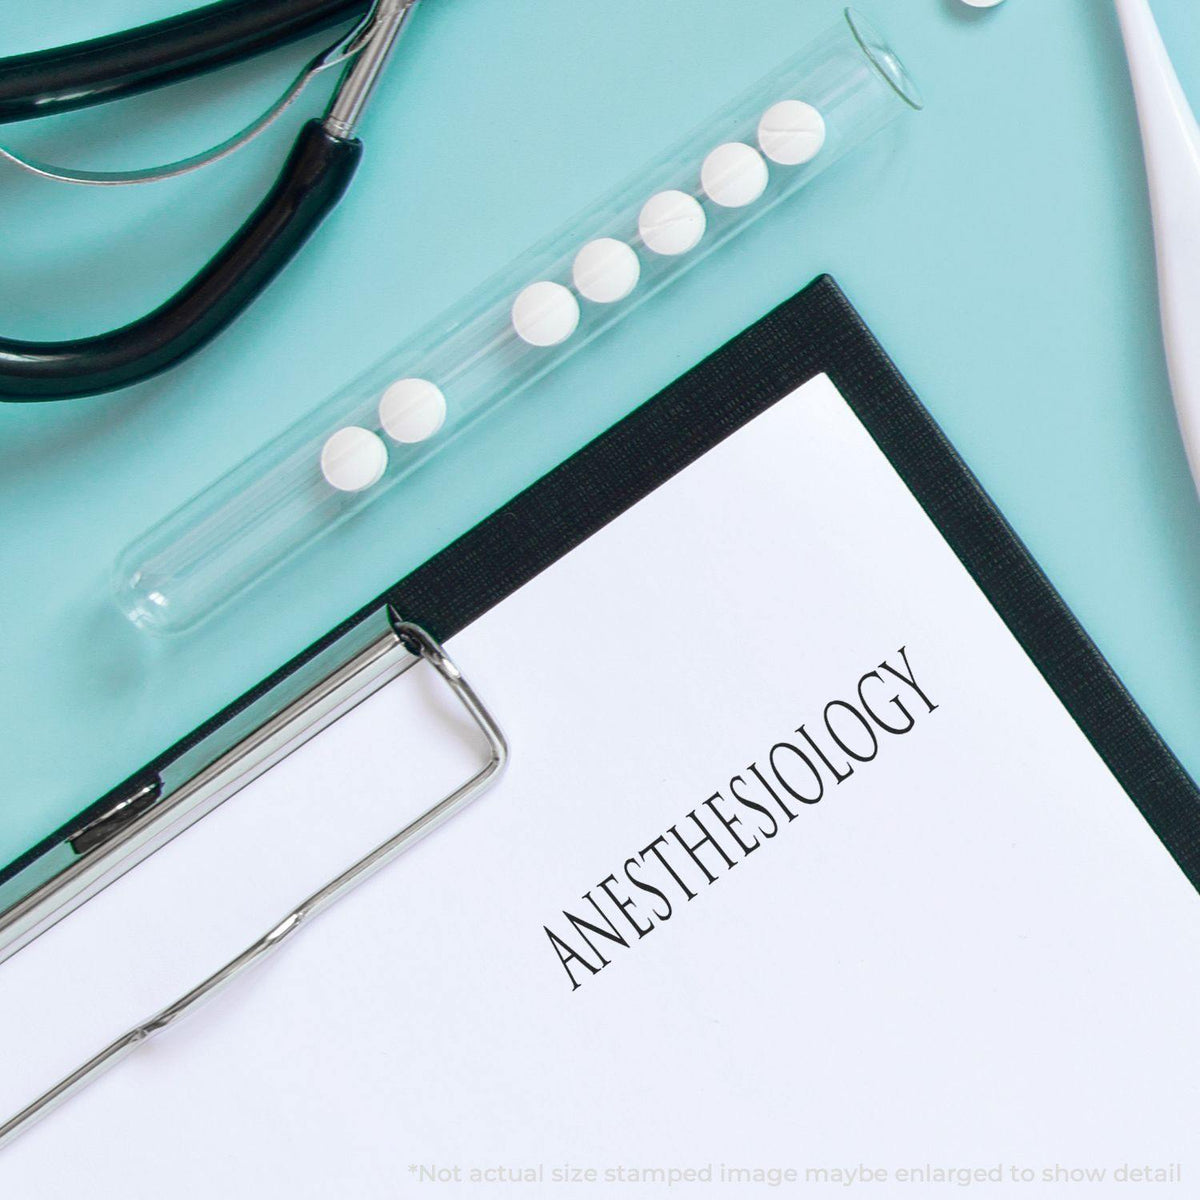 Anesthesiology Rubber Stamp In Use Photo